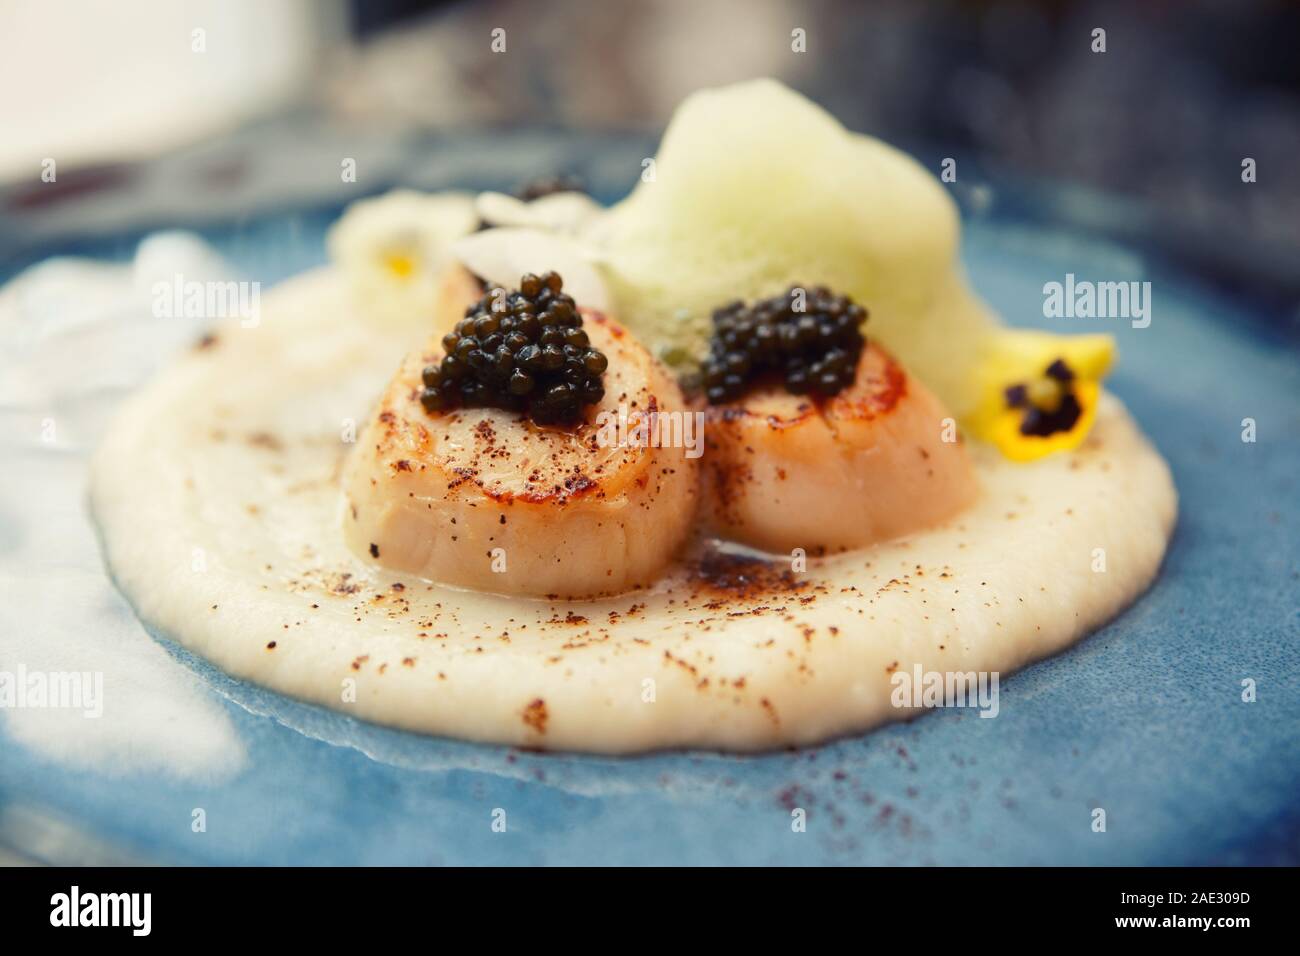 Pan seared sea scallops with caviar and molecular froth on blue clay plate, close-up, cross processing tone Stock Photo